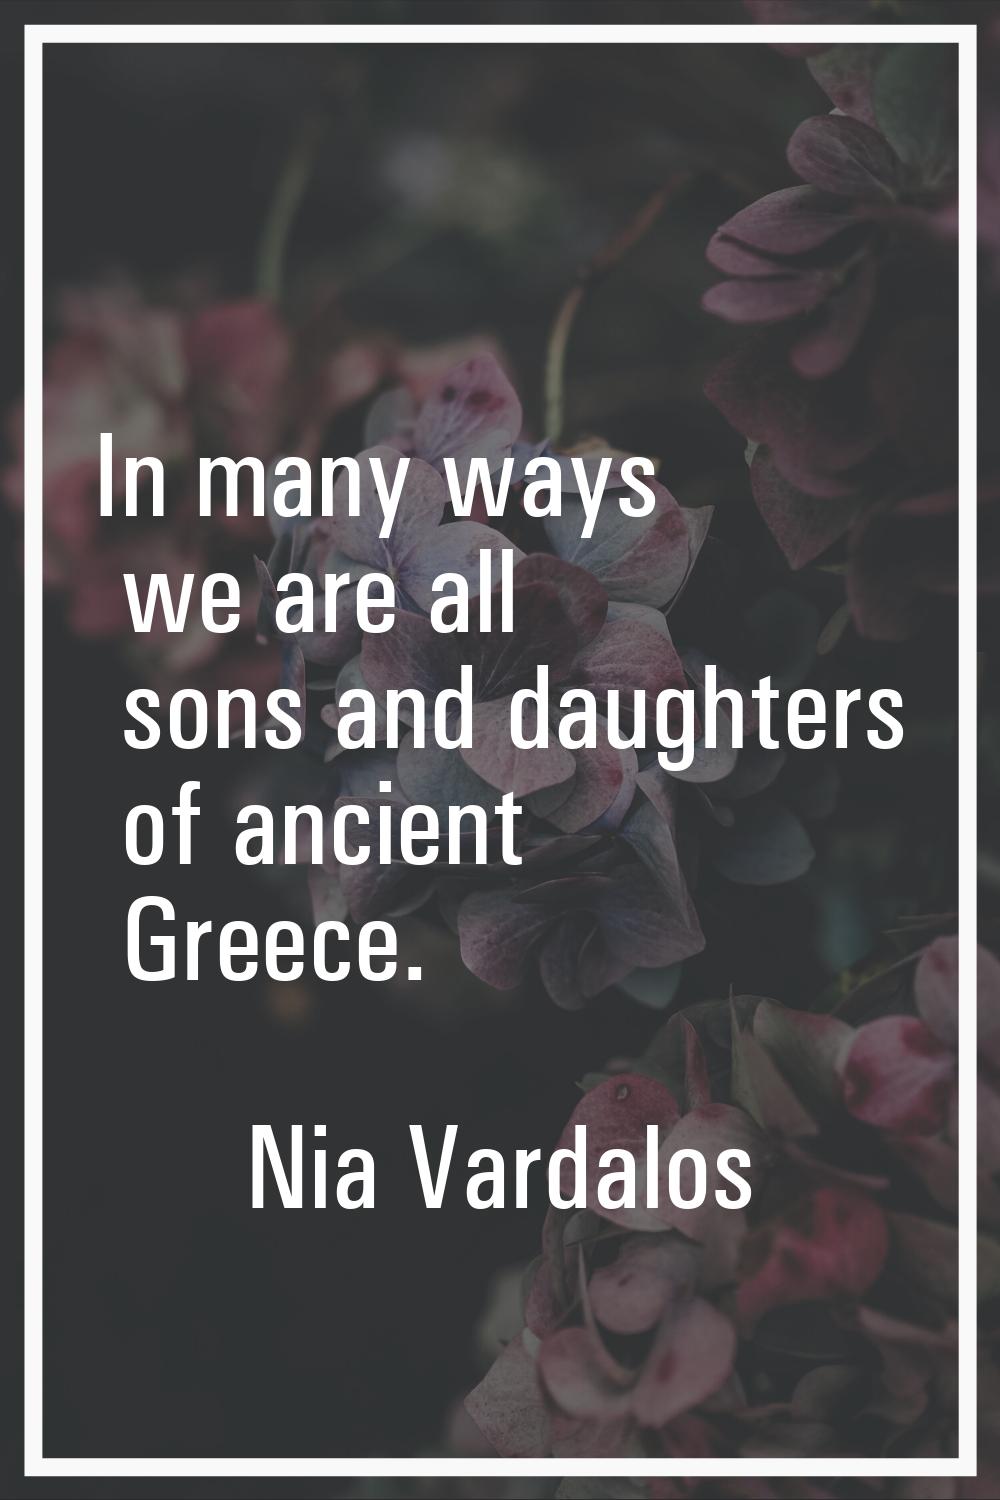 In many ways we are all sons and daughters of ancient Greece.